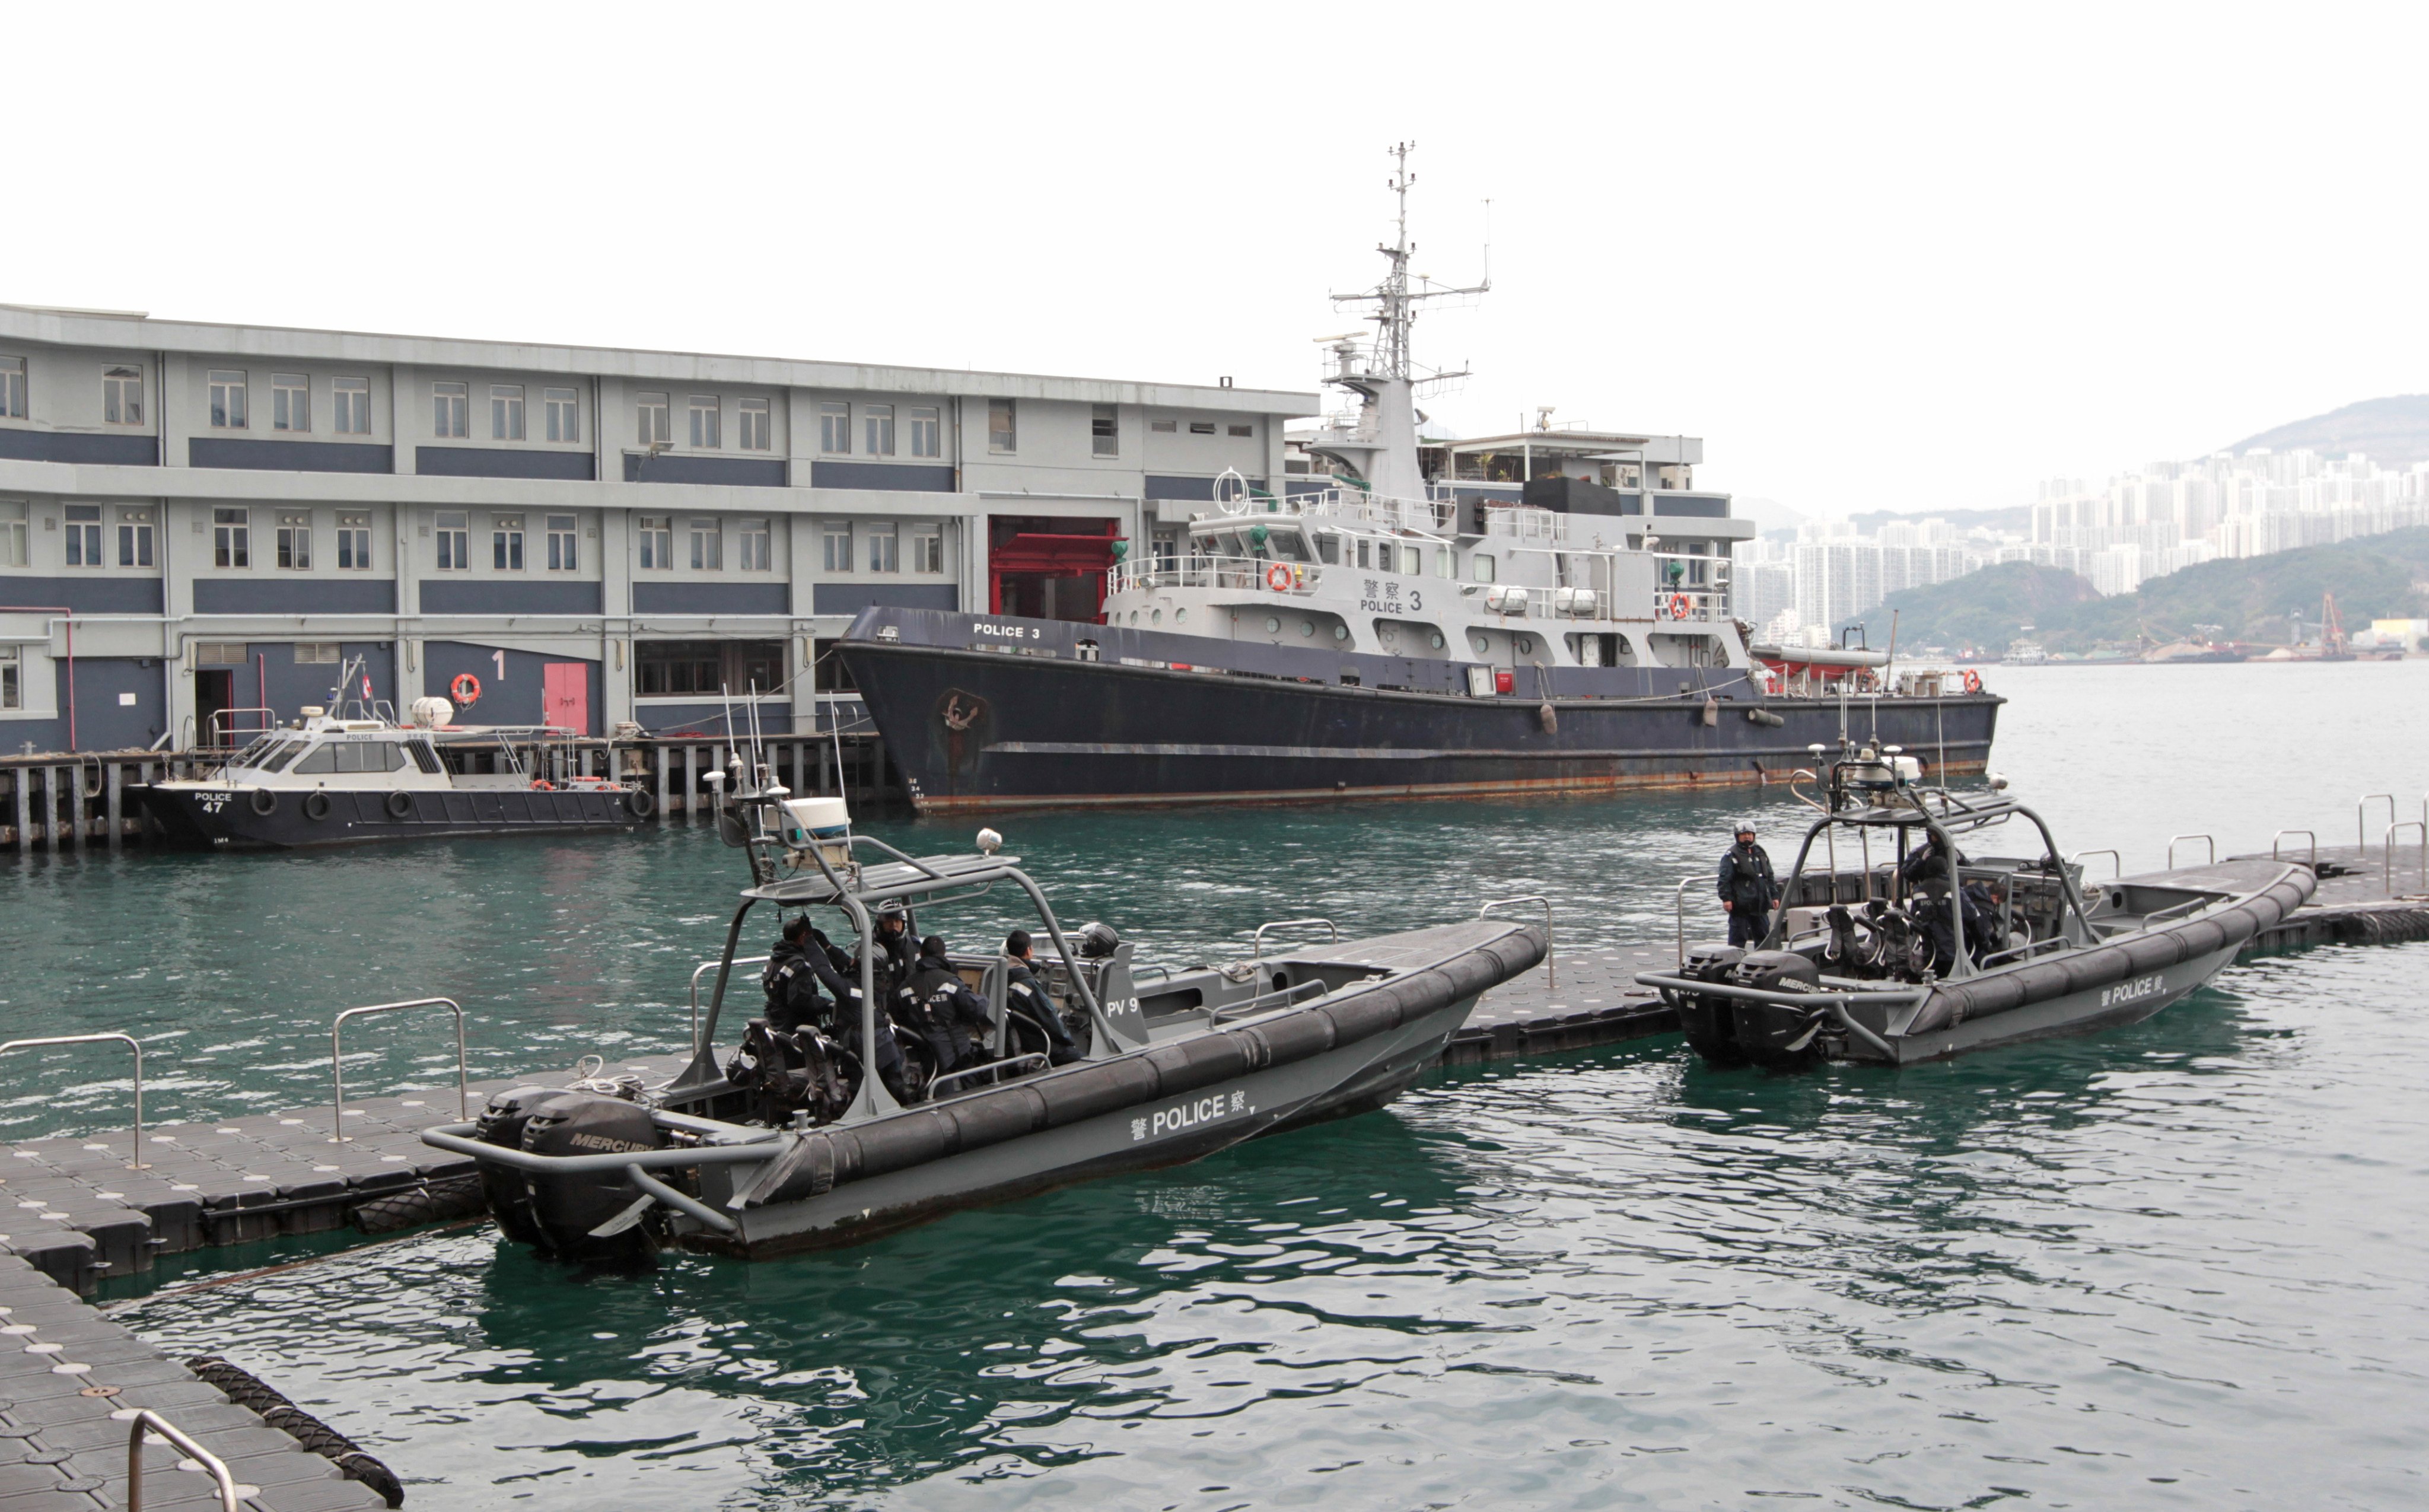 The incident occurred at the marine police base in Sai Wan Ho on Sunday. Photo: Bruce Yan